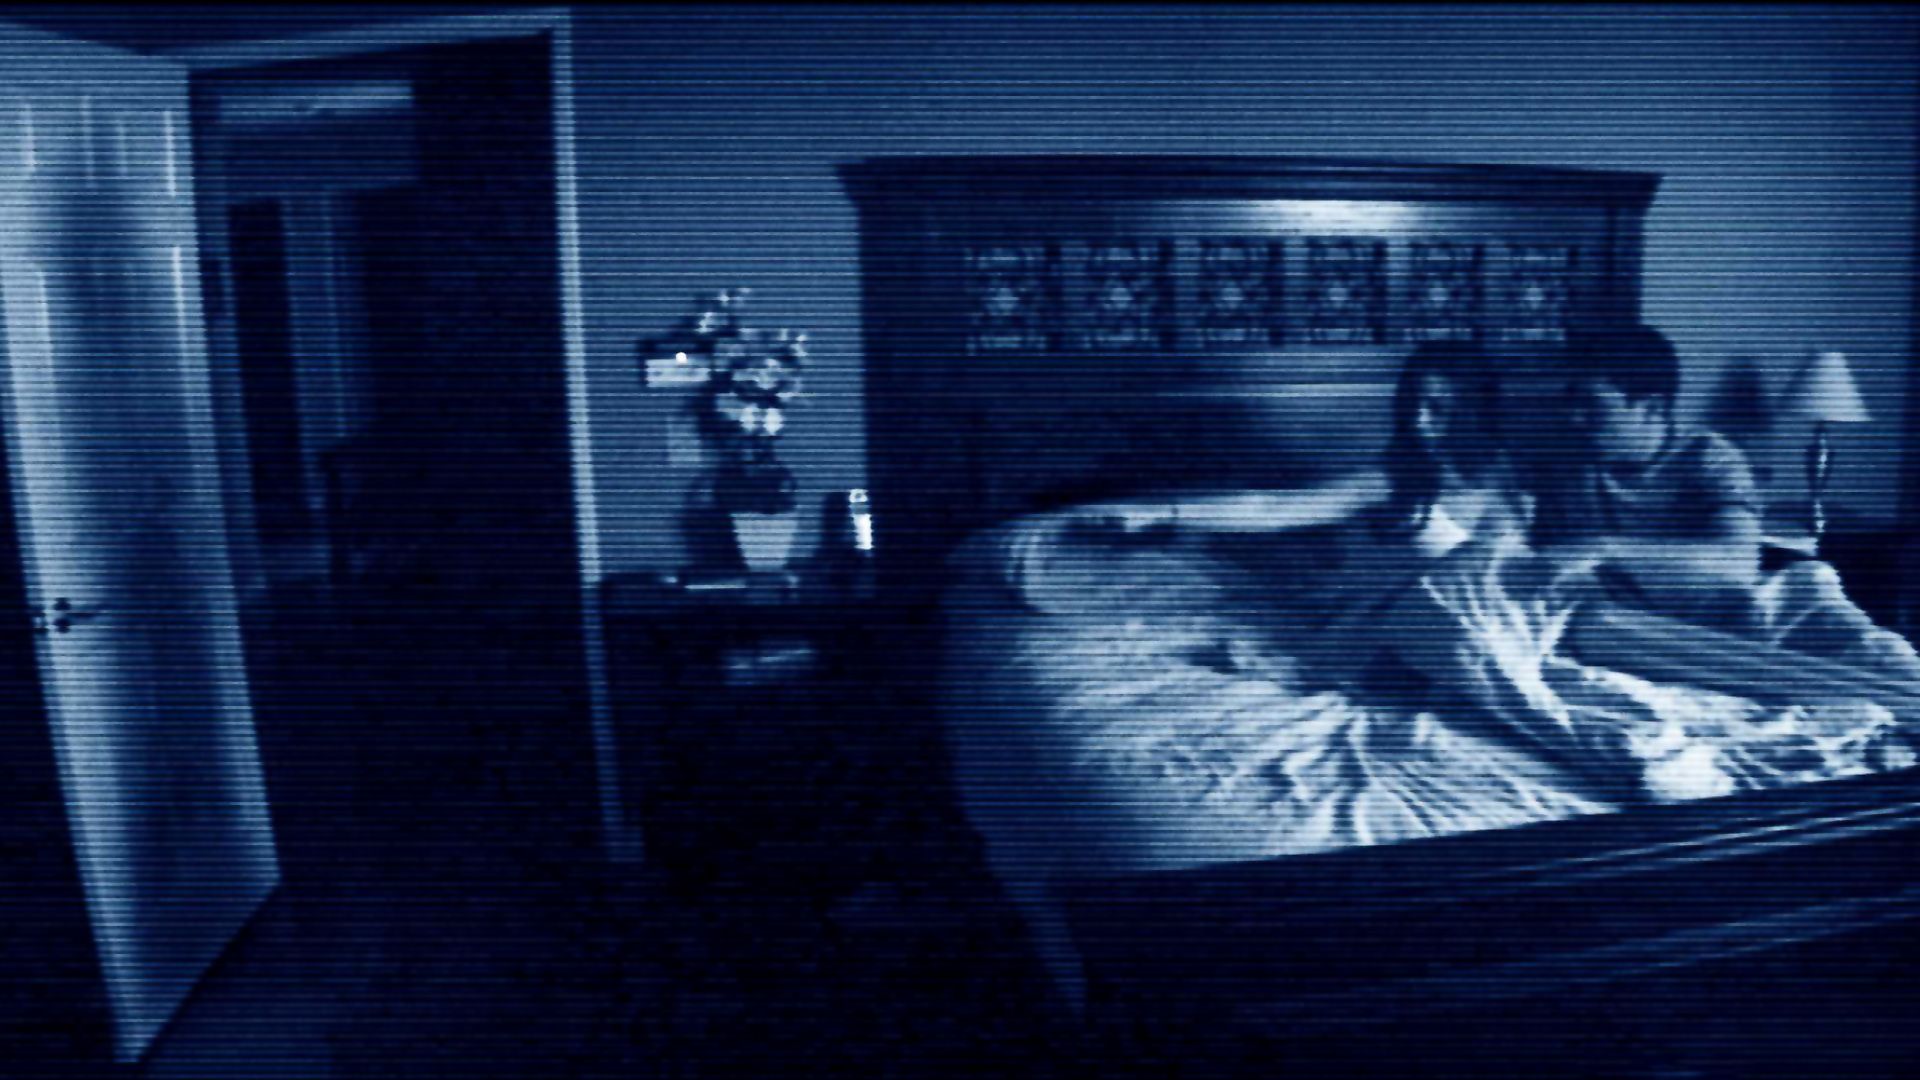 Paranormal Activity background